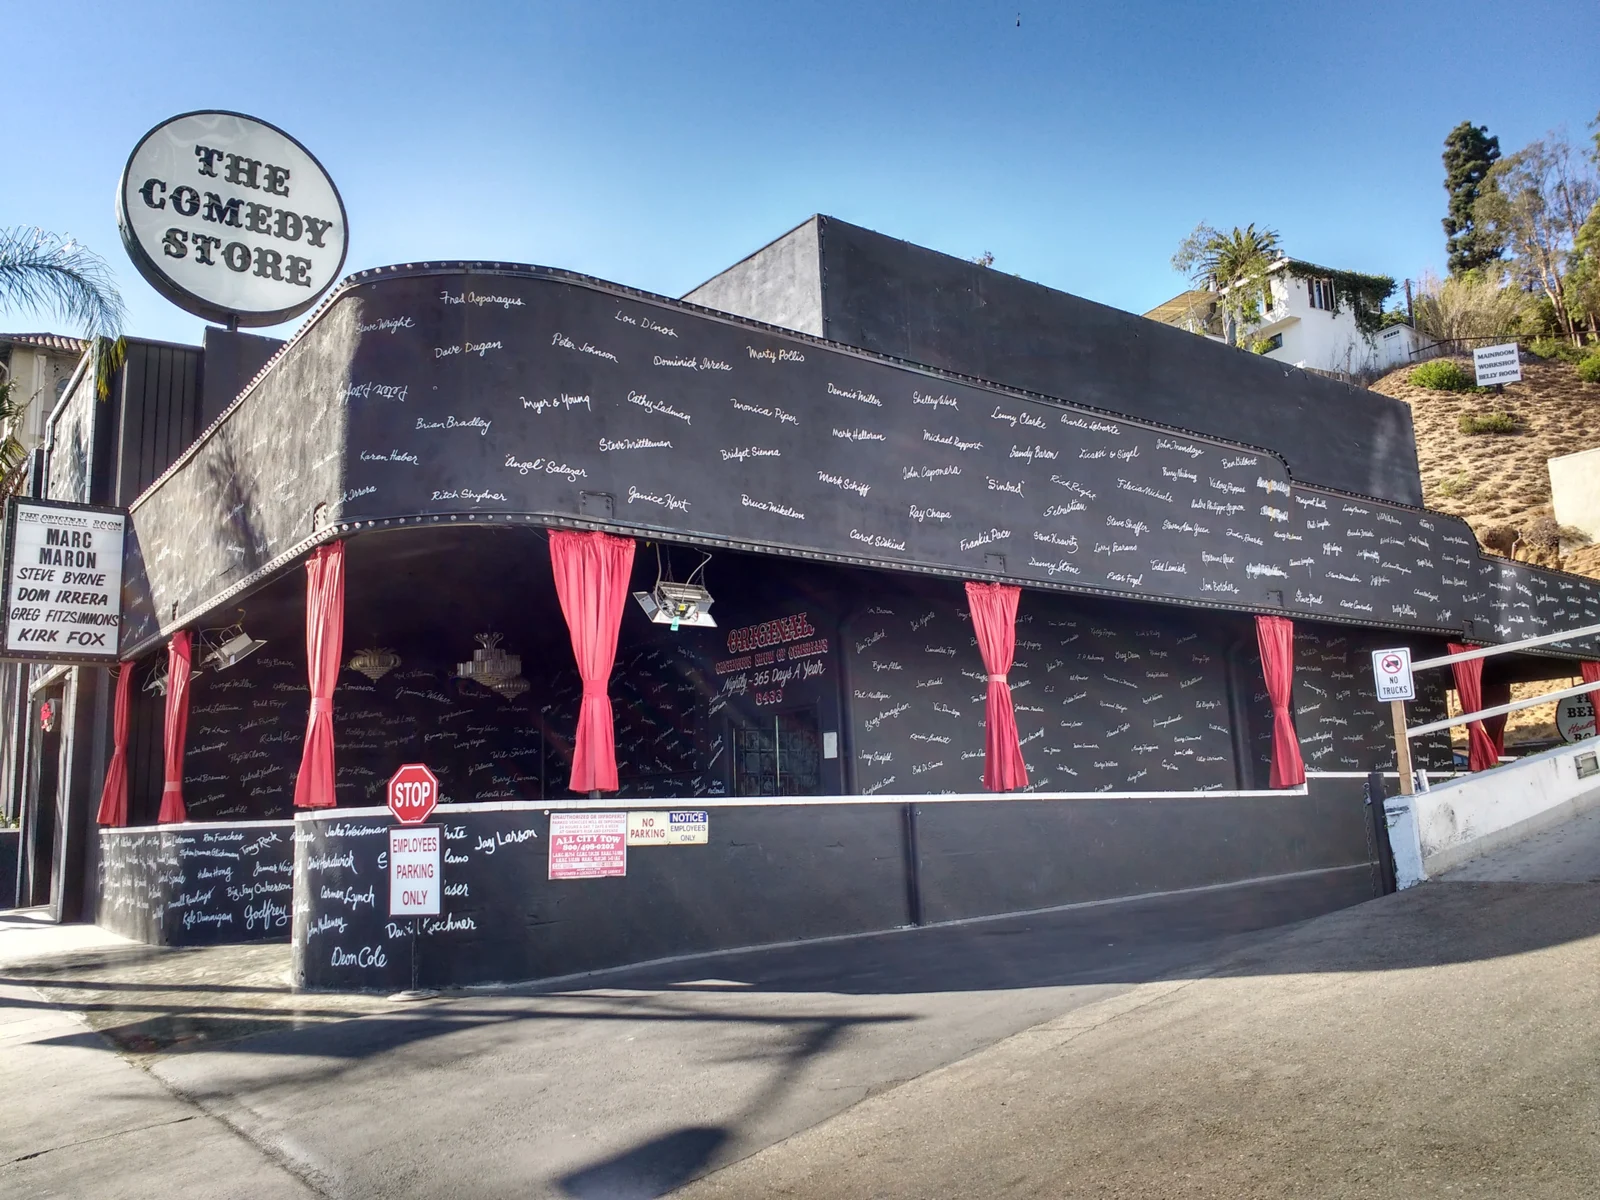 One of the best attractions in Los Angeles, the Comedy Store, pictured from the street